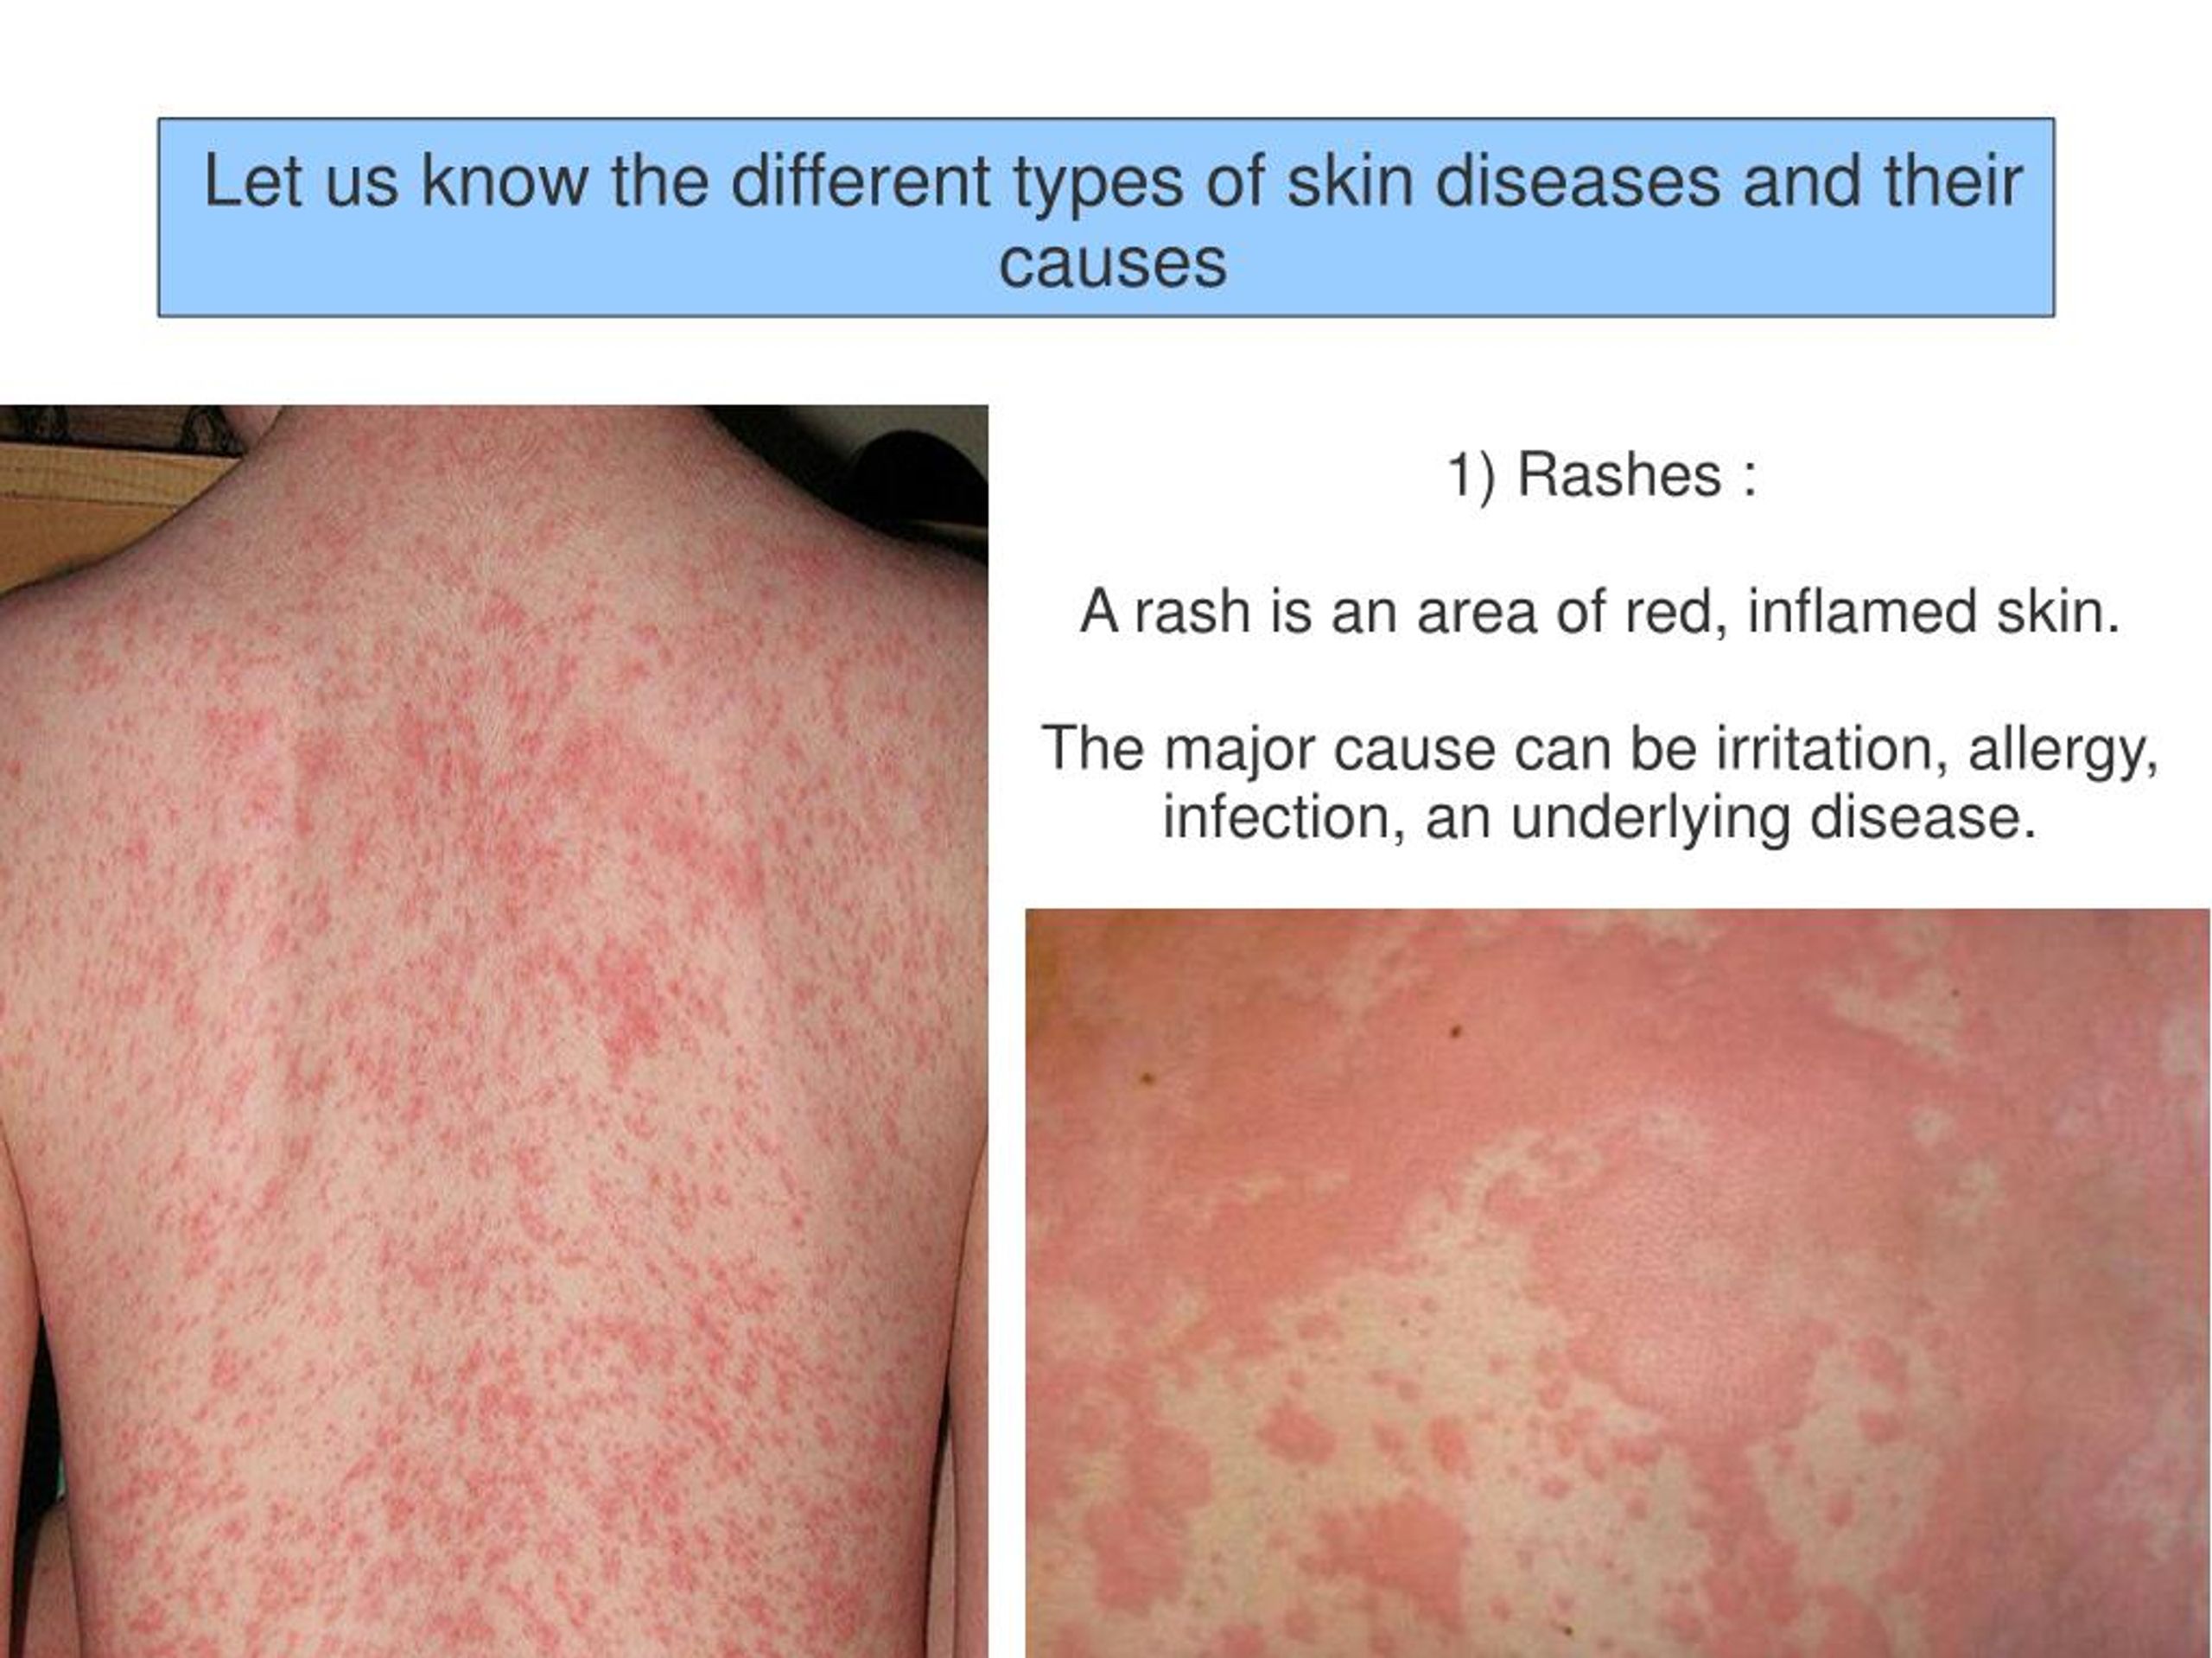 PPT - Different Types Of Skin Diseases And Their Causes ...